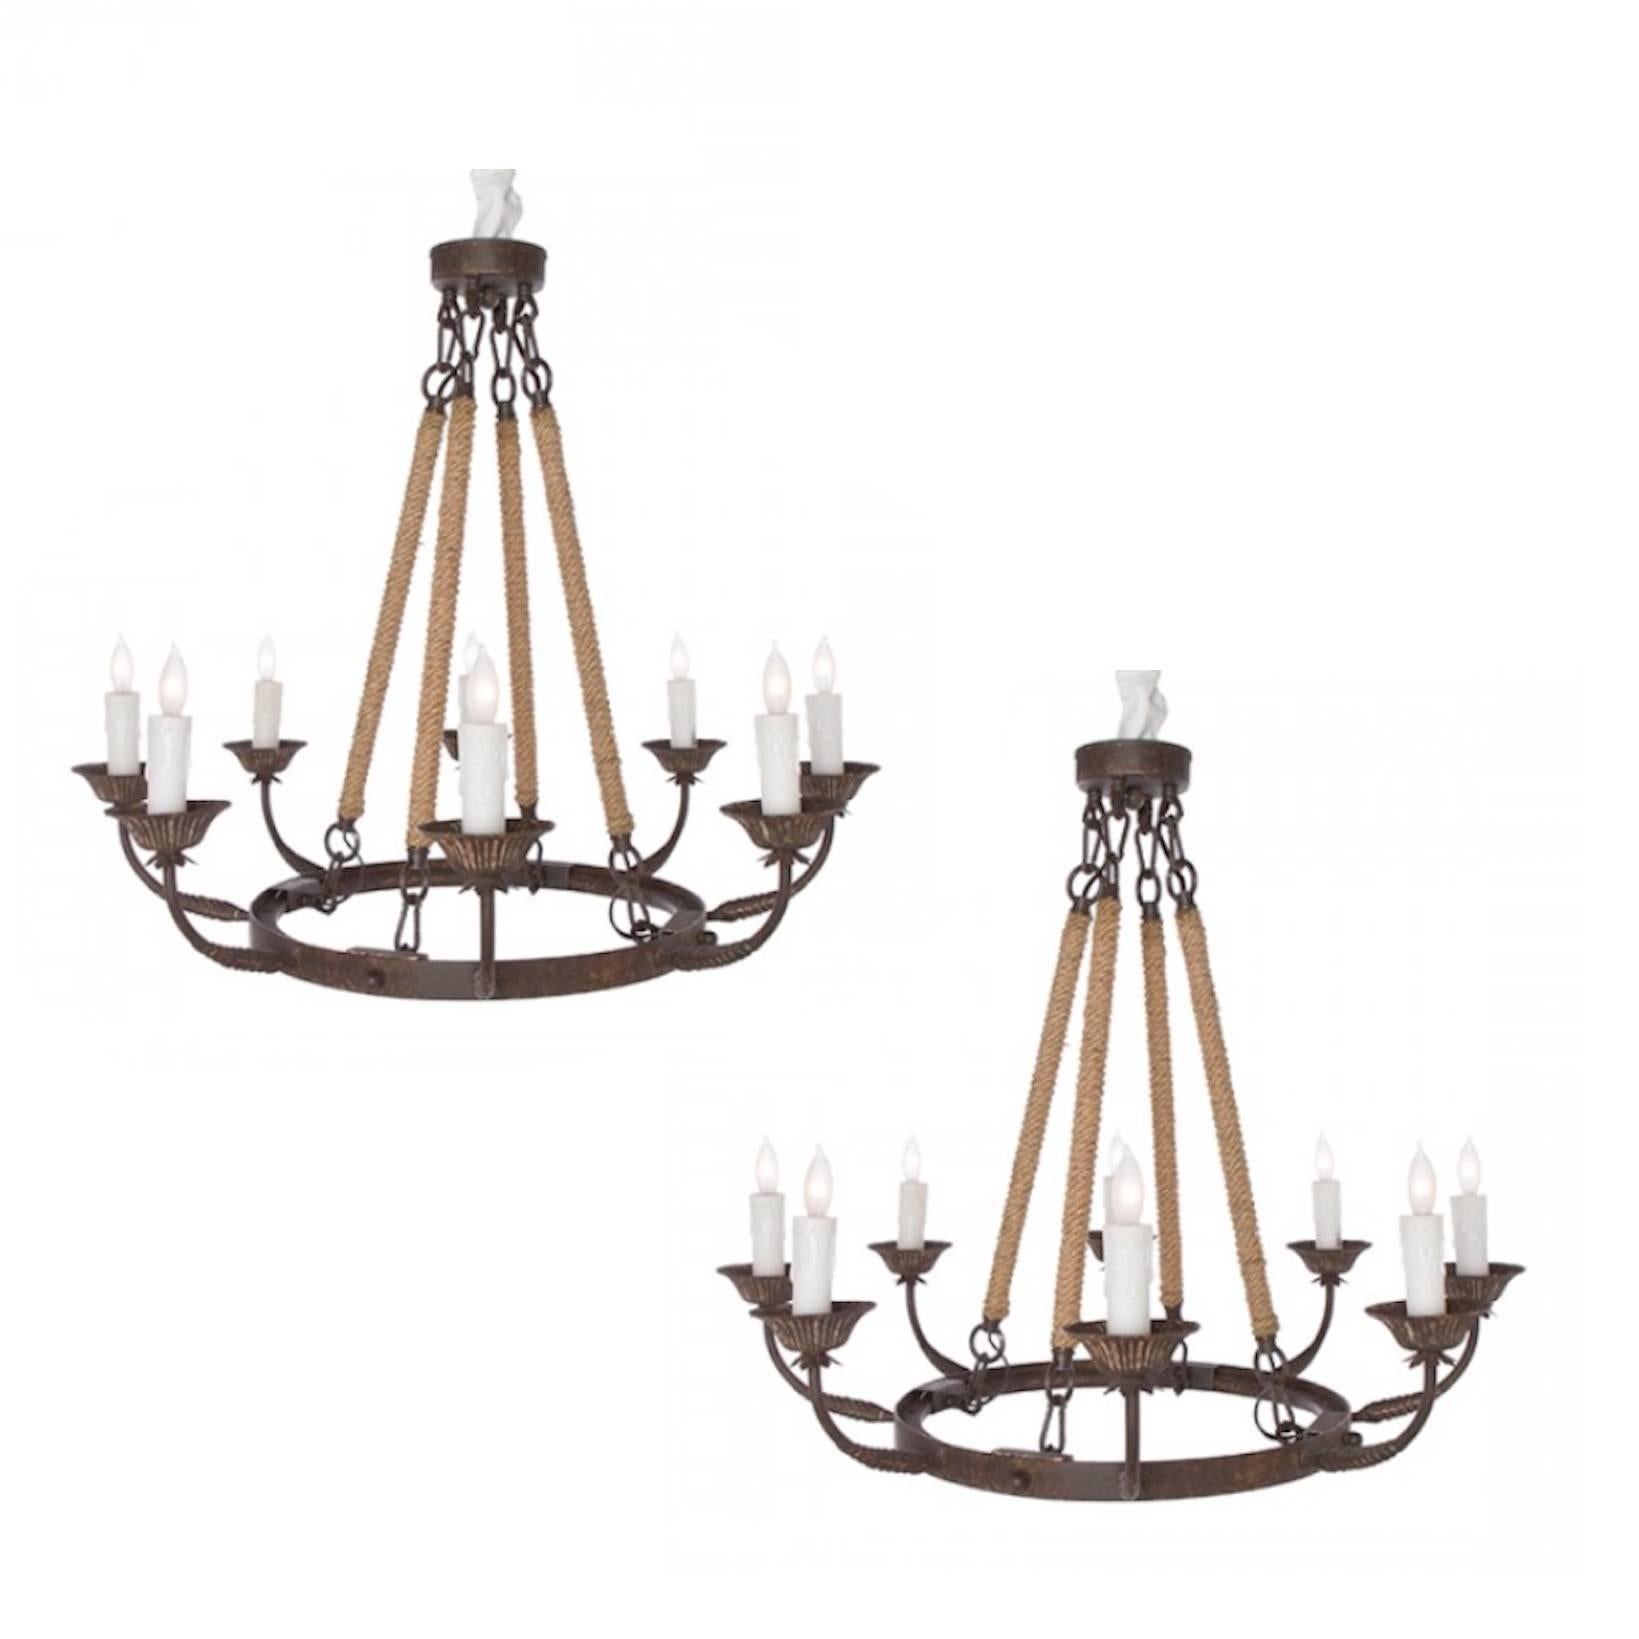 Pair of Rustic Eight-Arm Chandeliers of Small-Scale